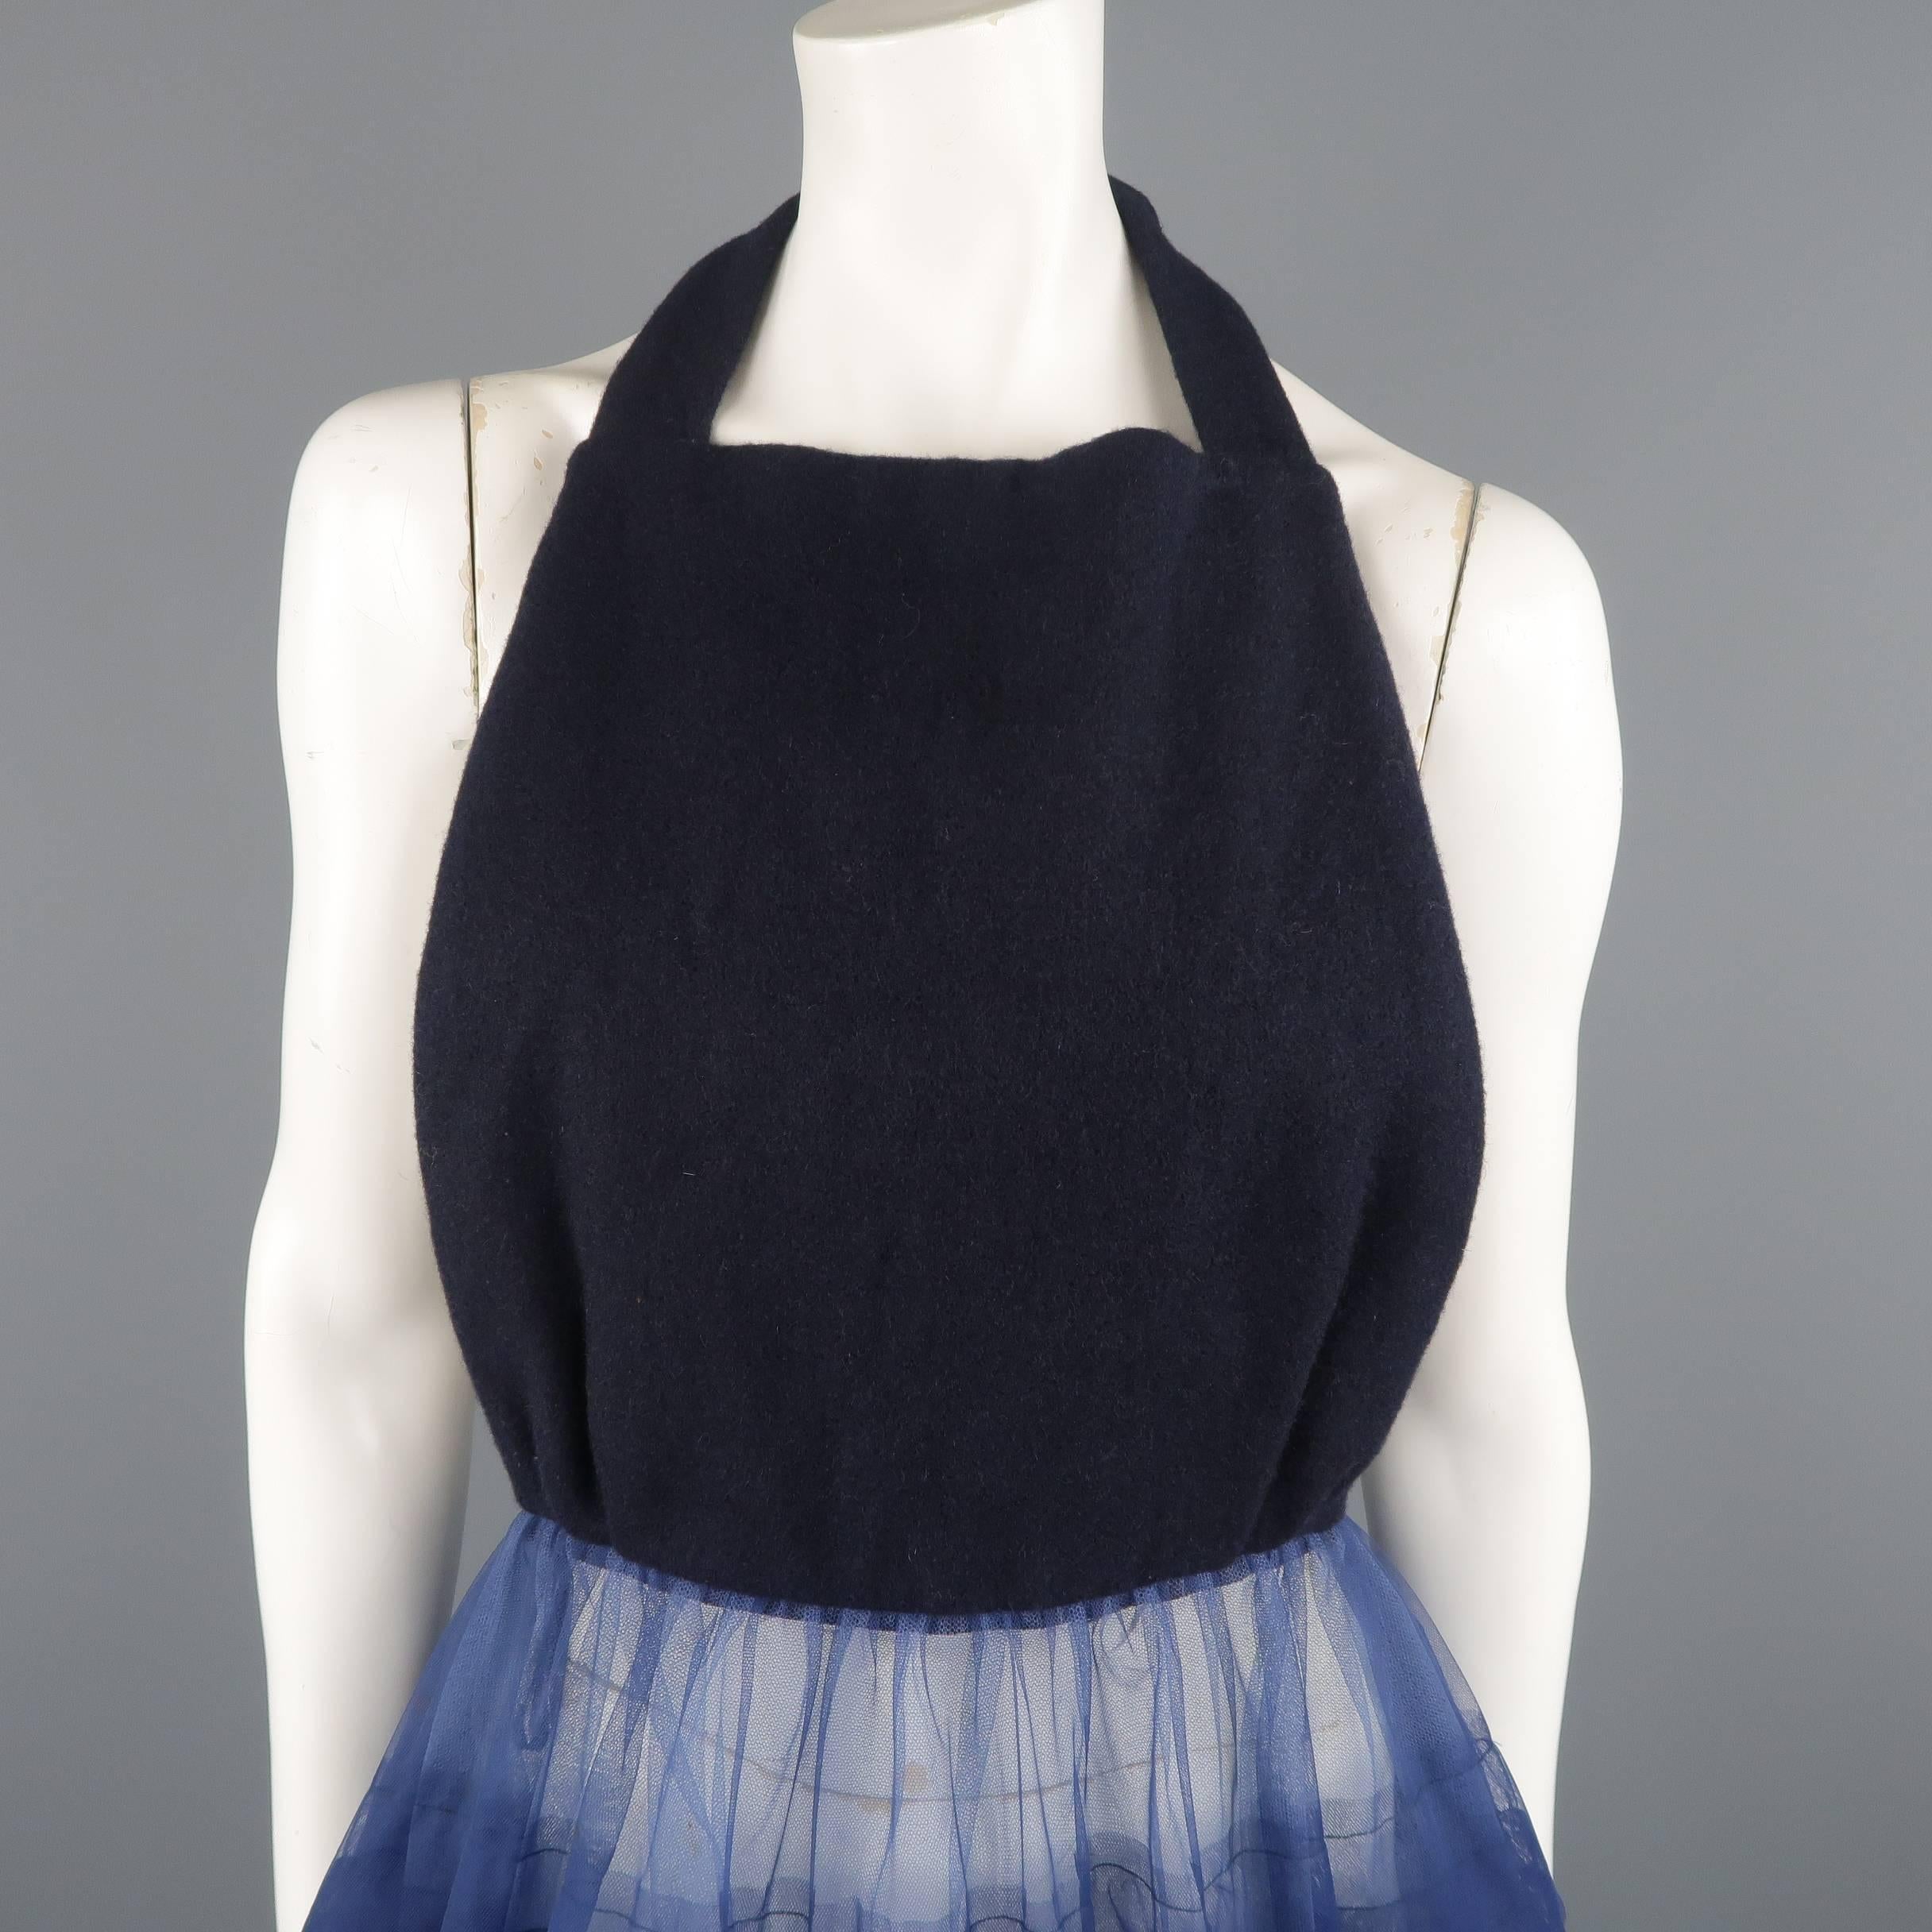 Comme Des Garcons dress features a navy blue felt pleated front panel top with halter tied back and a sheer blue pleated layer tulle circle skirt. Wear and stains throughout. Tags removed. As is.
 
Fair Pre-Owned Condition.
Marked: (no size)
